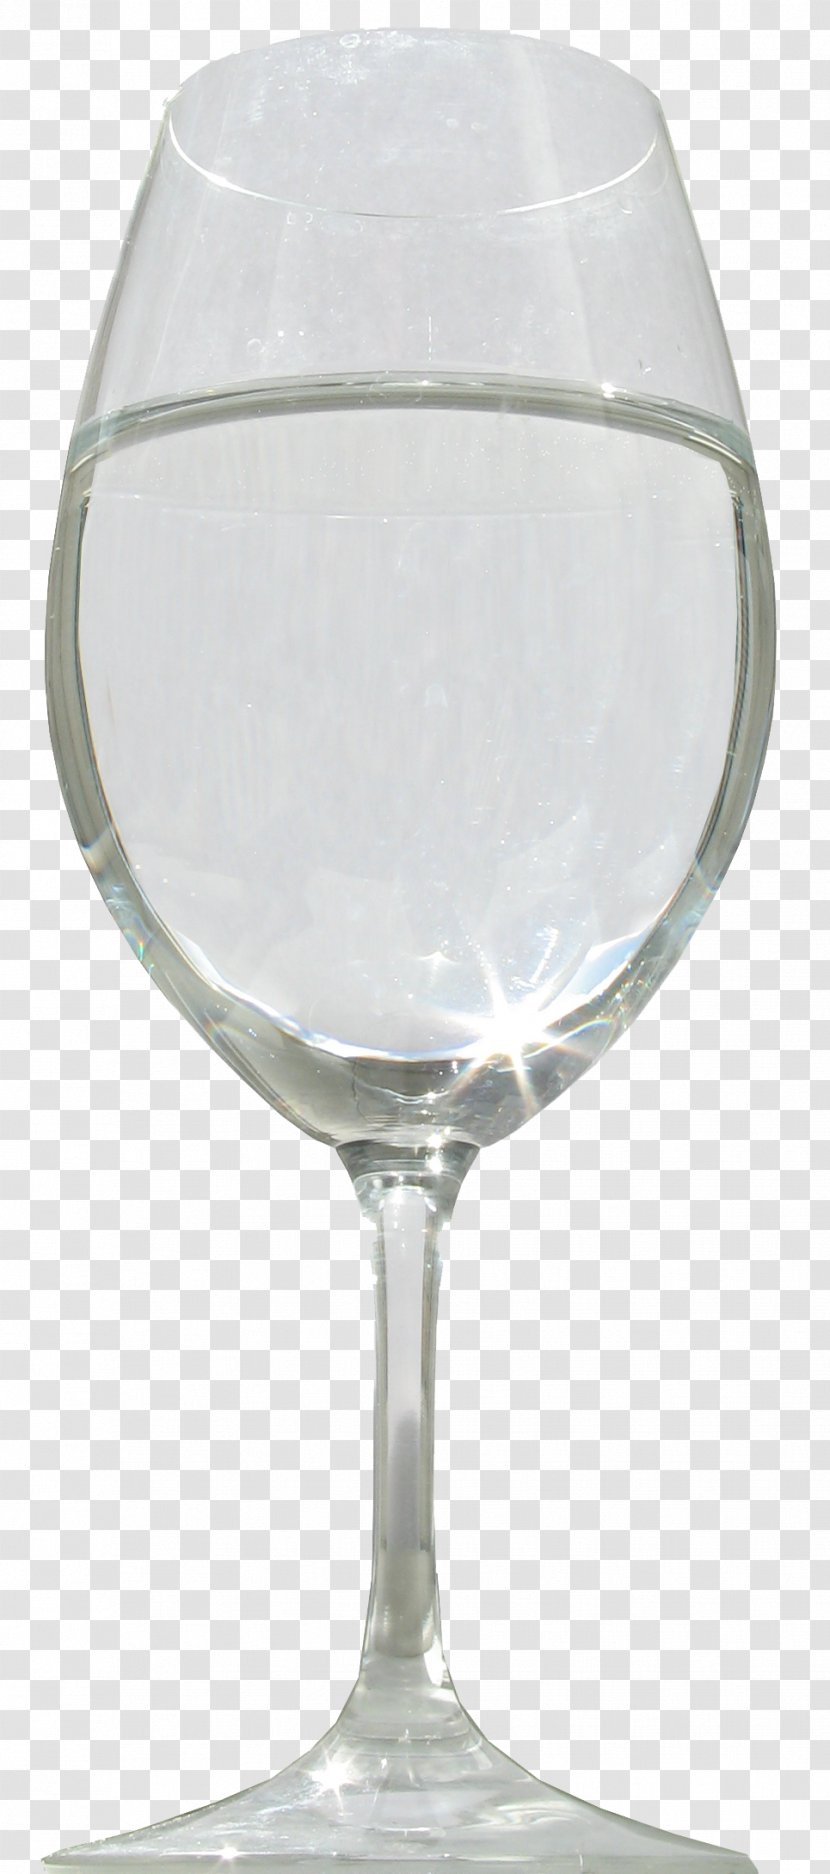 Wine Glass Snifter Champagne Highball Beer Glasses - Solvent In Chemical Reactions - Seawater/ Transparent PNG